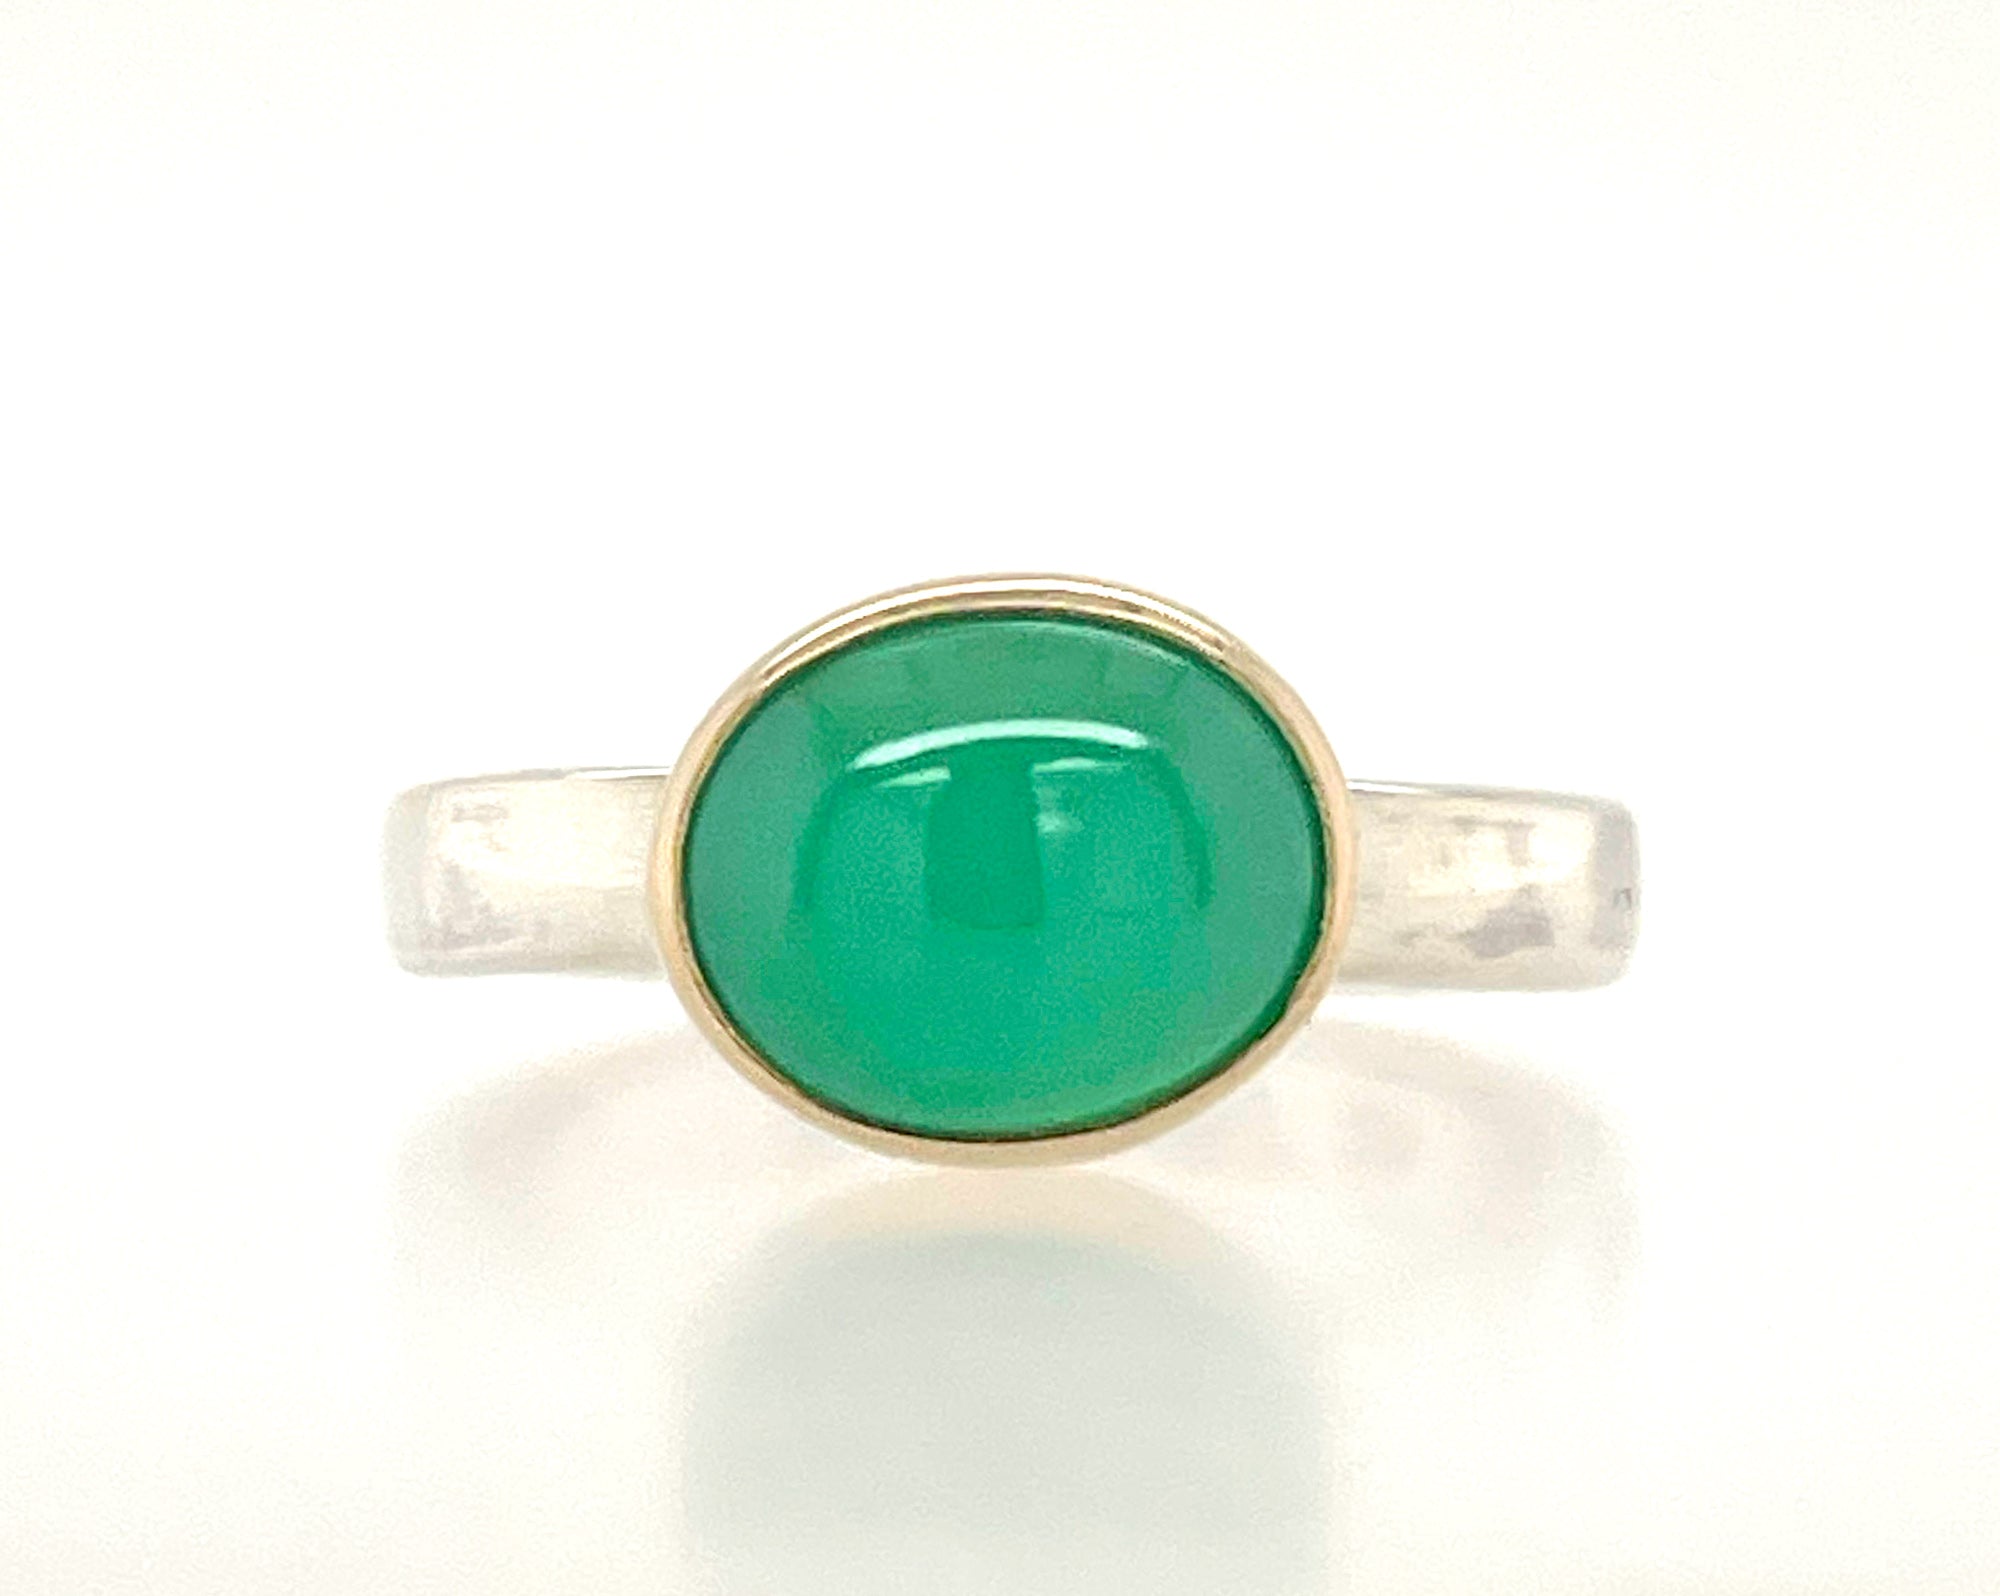 Chrysoprase Ring in 14k Gold and Sterling Silver, Apple Green Chrysoprase, East West Mixed Metal Stacking Ring, Green Gemstone Ring